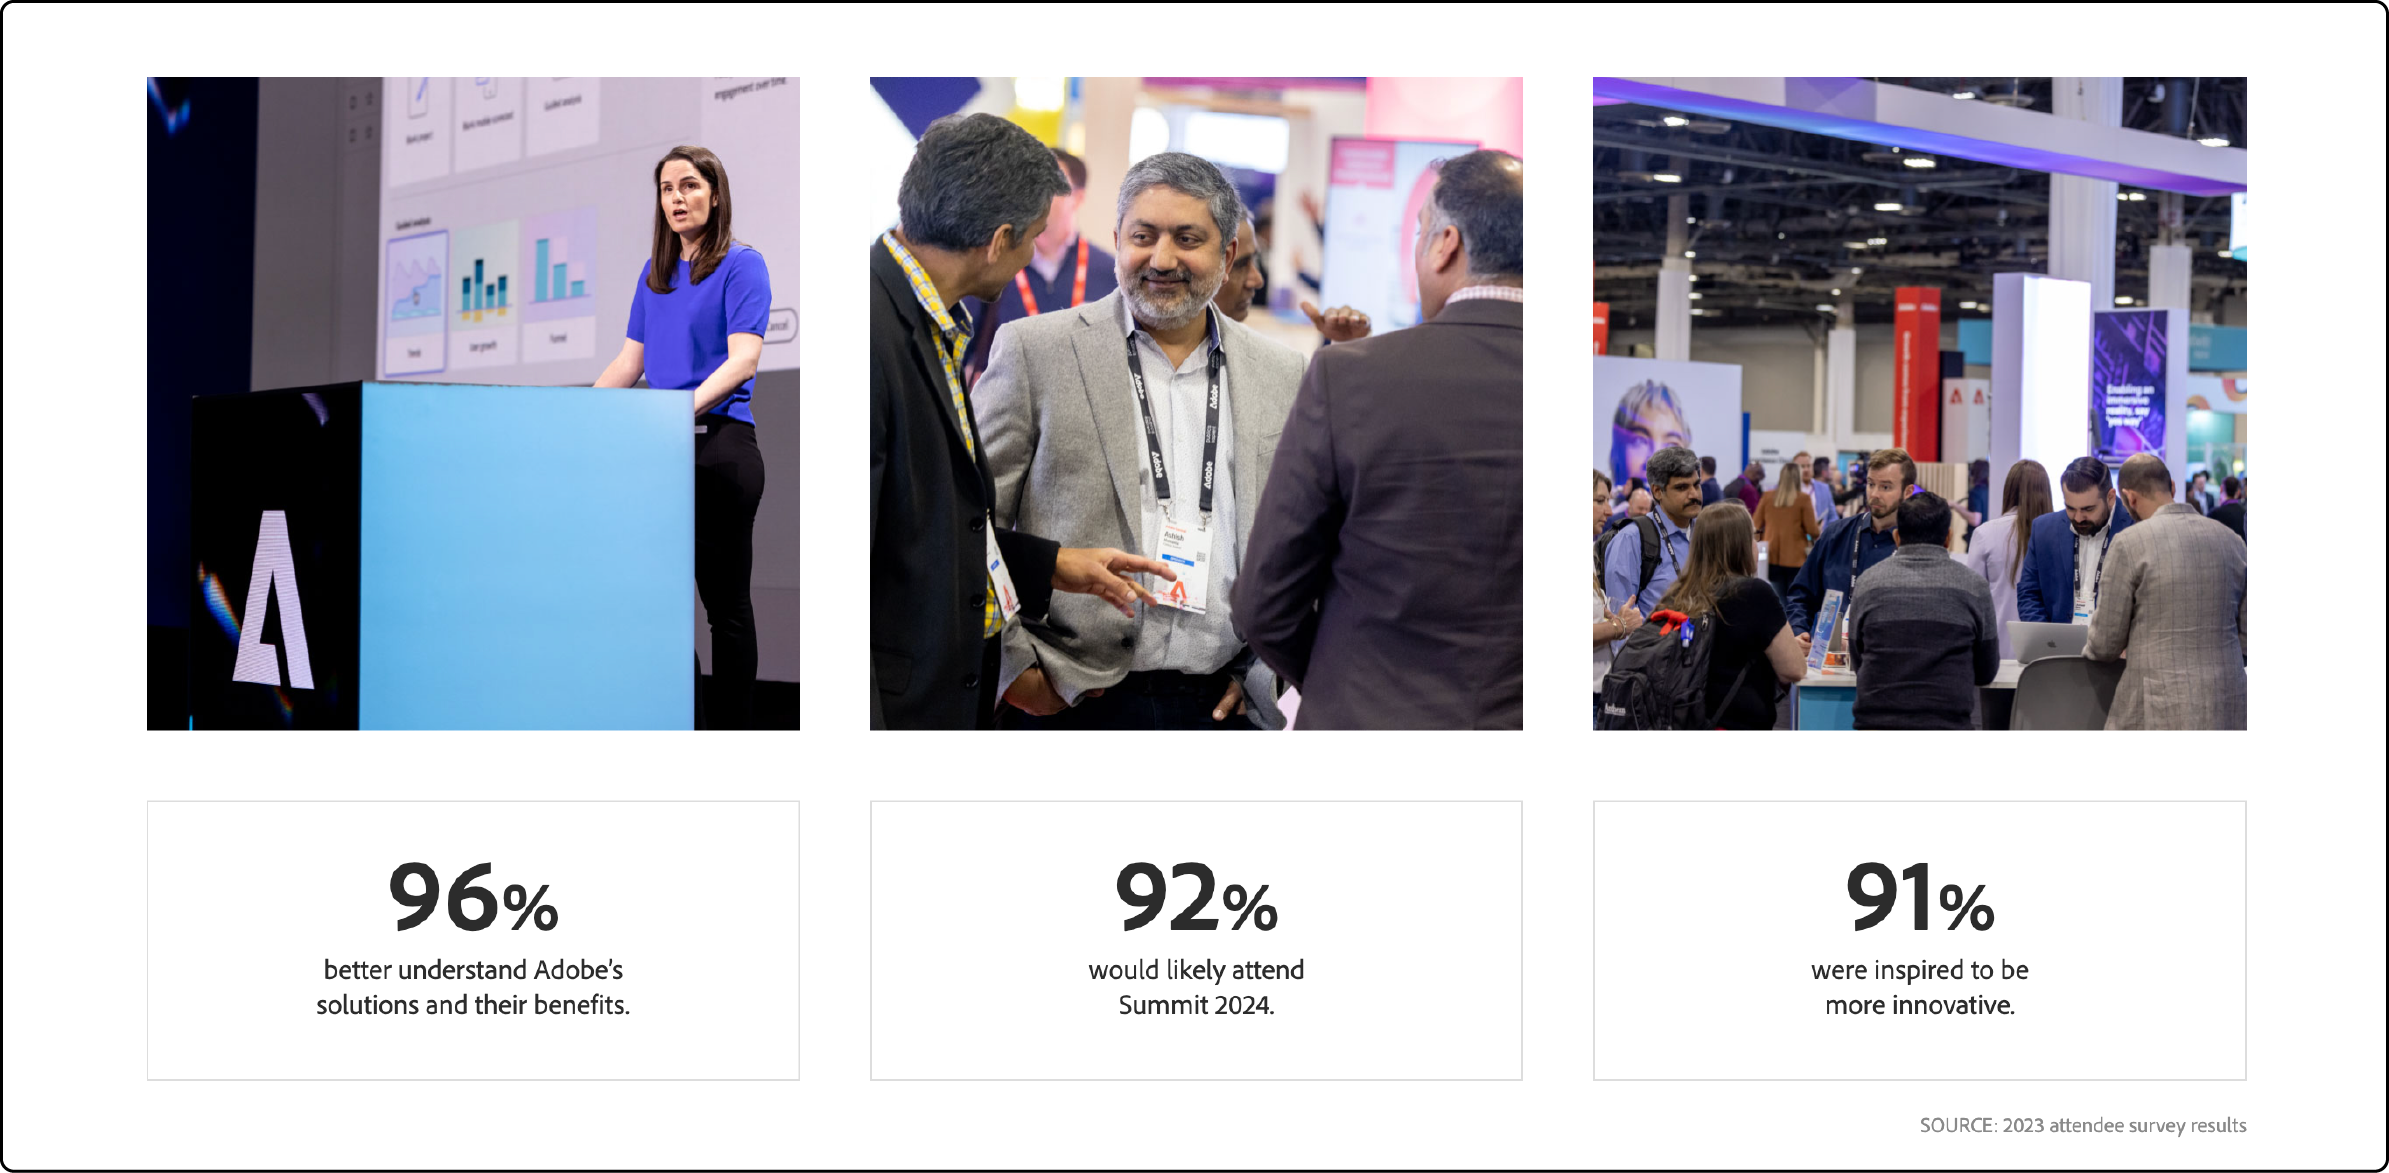 Diverse attendees at Adobe Summit 2024 including advertisers, developers, and executives